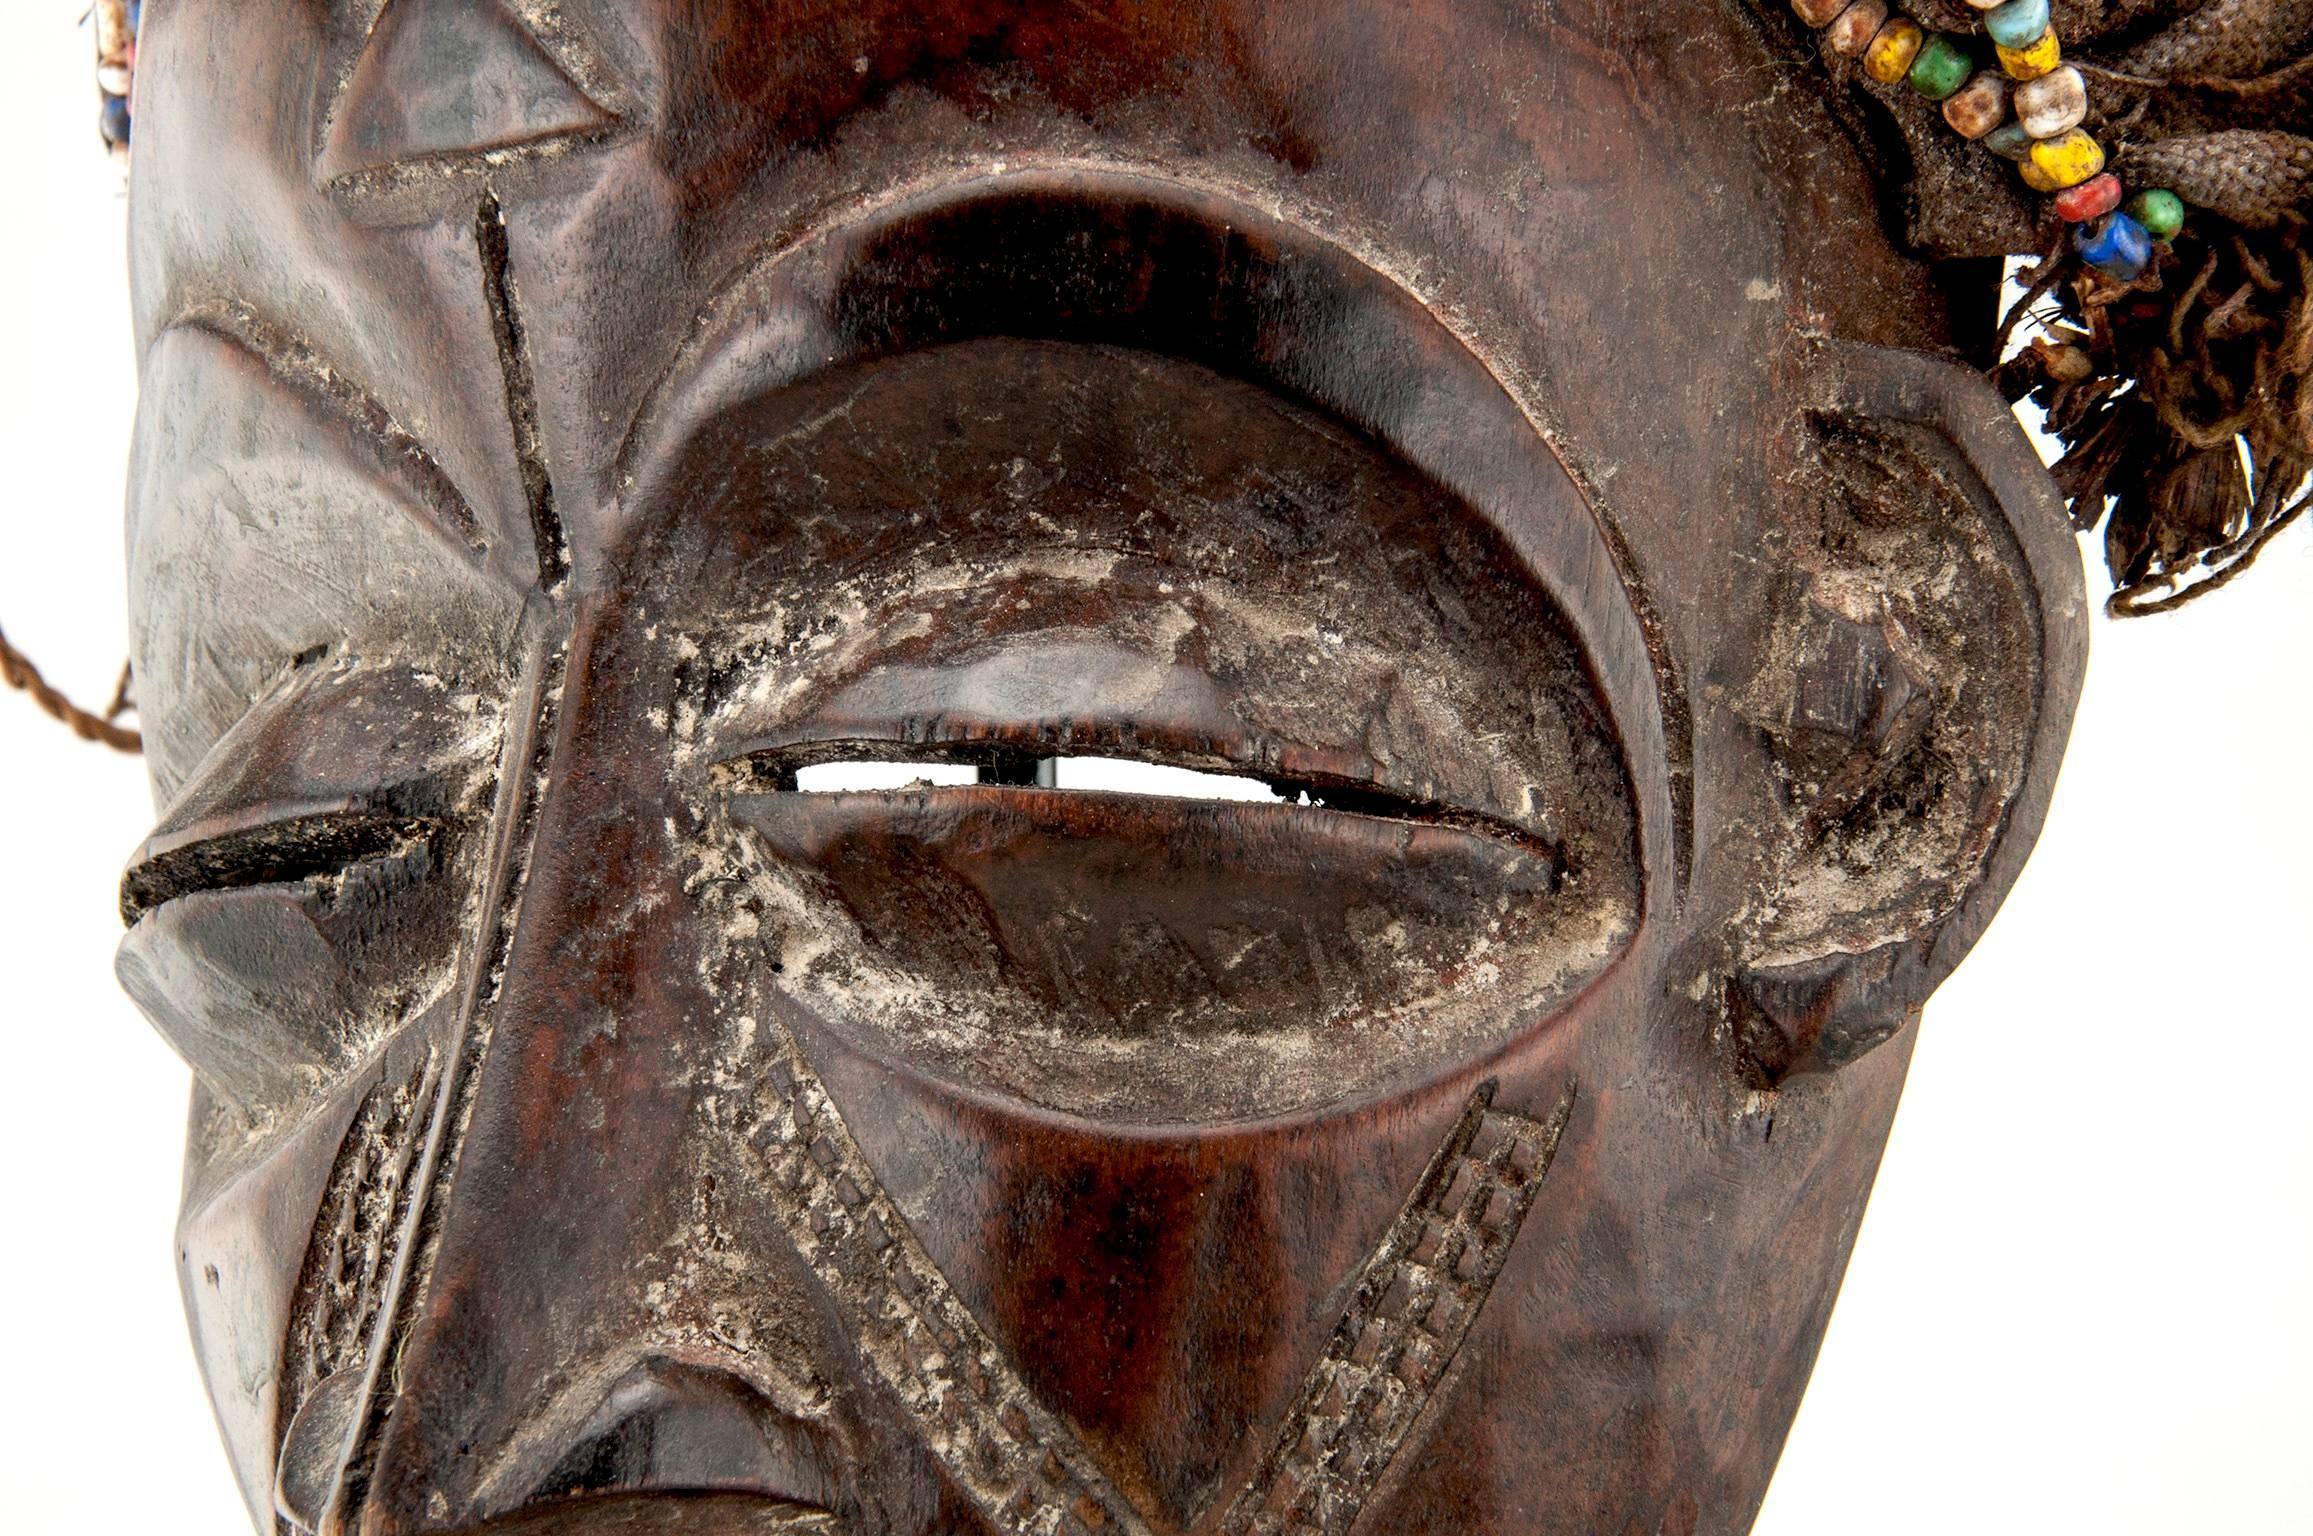 Measures: Total height 24.40 inches (62cm))
Highly decorative wood African mask
African sculpture
Sold with its pedestal.